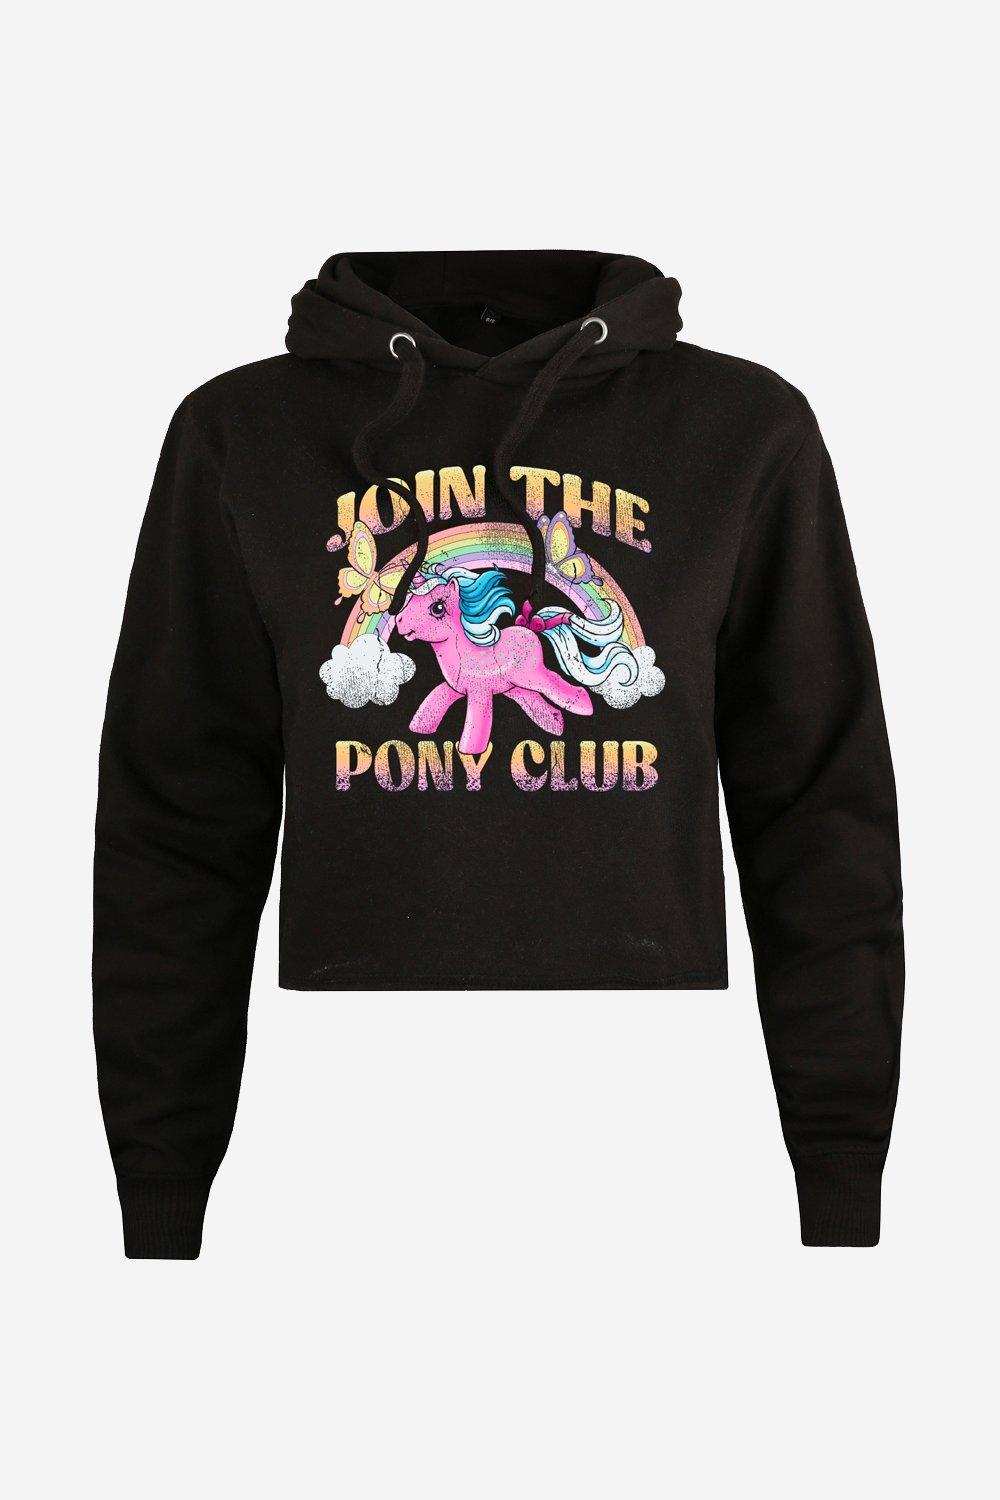 join the pony club cropped hoodie